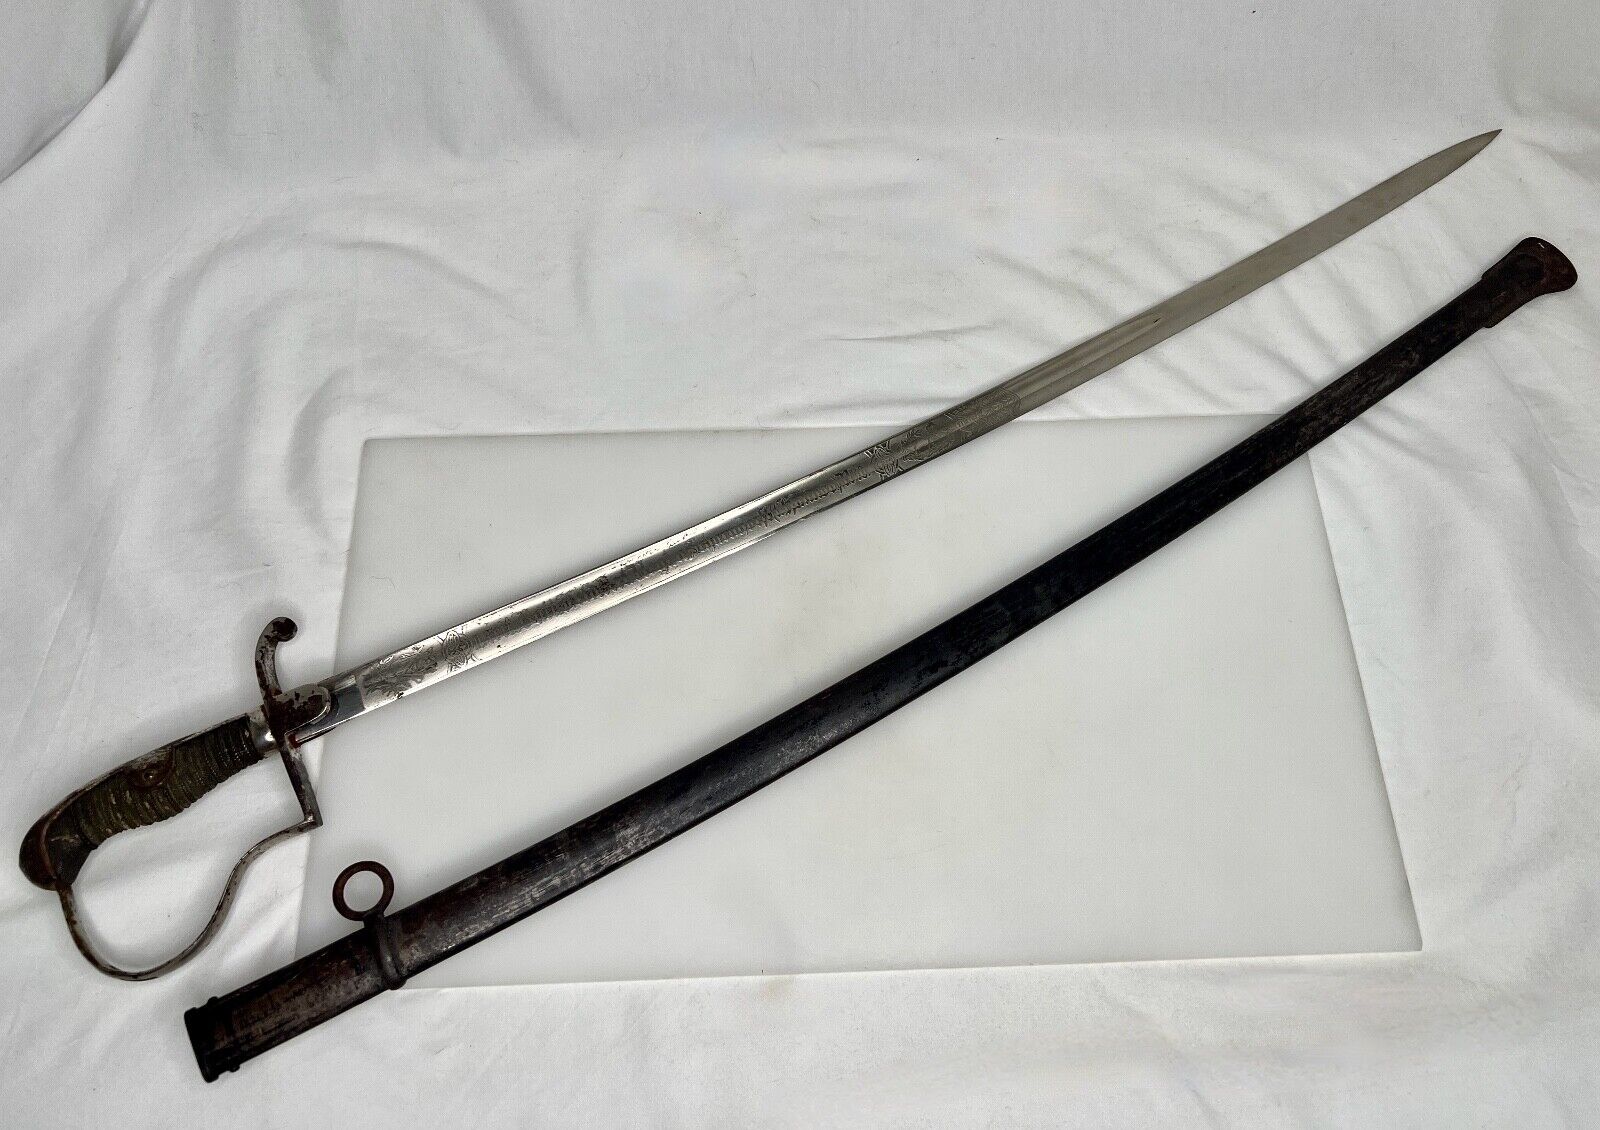 Antique Etched Prussian Sword and Scabbard - 92486